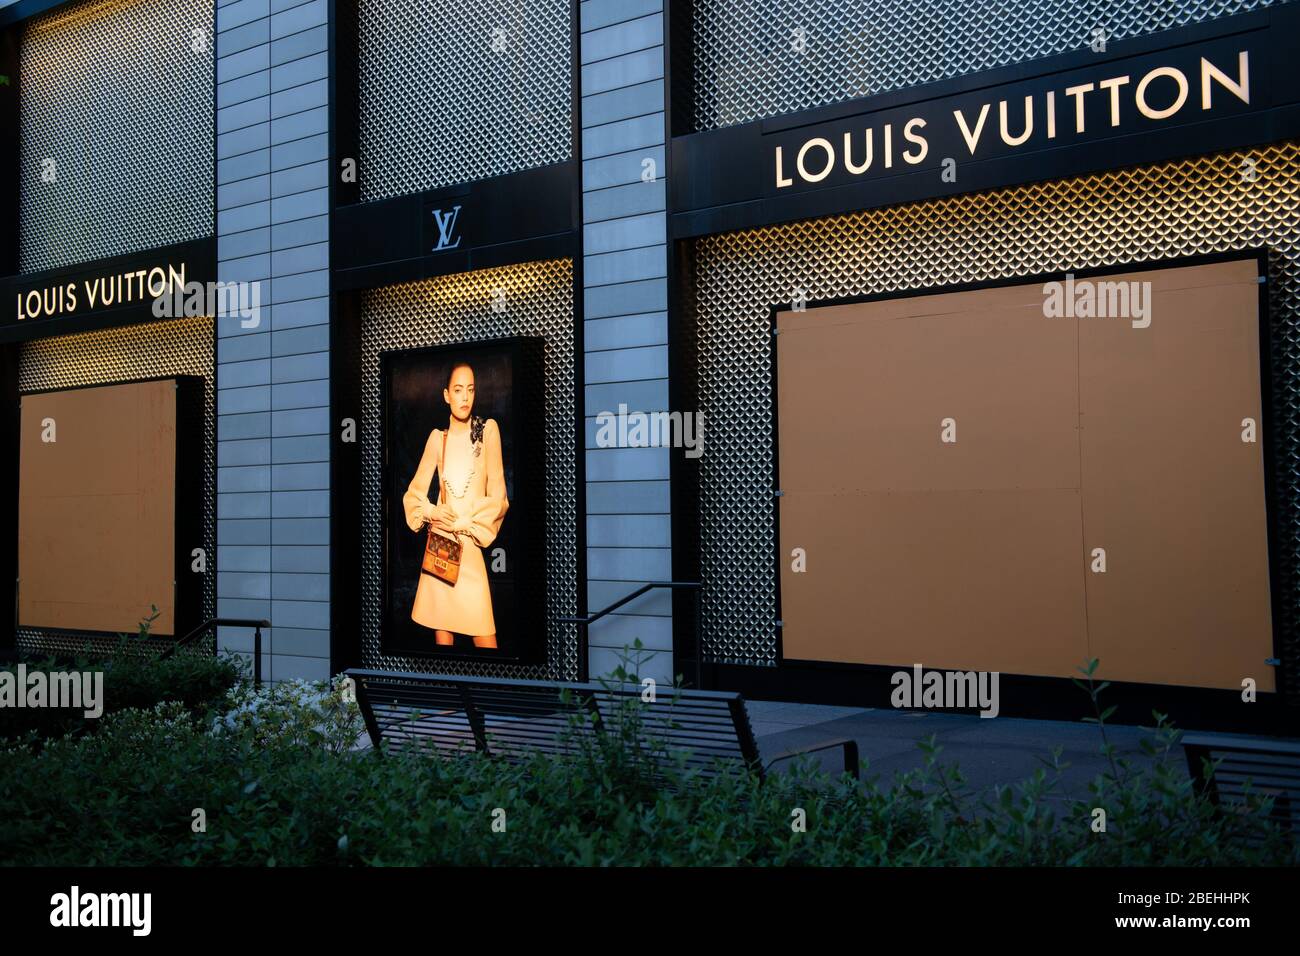 LOUIS VUITTON WASHINGTON DC CITYCENTER  28 Photos  92 Reviews  943  Palmer Alley NW Washington District of Columbia United States  Leather  Goods  Phone Number  Yelp